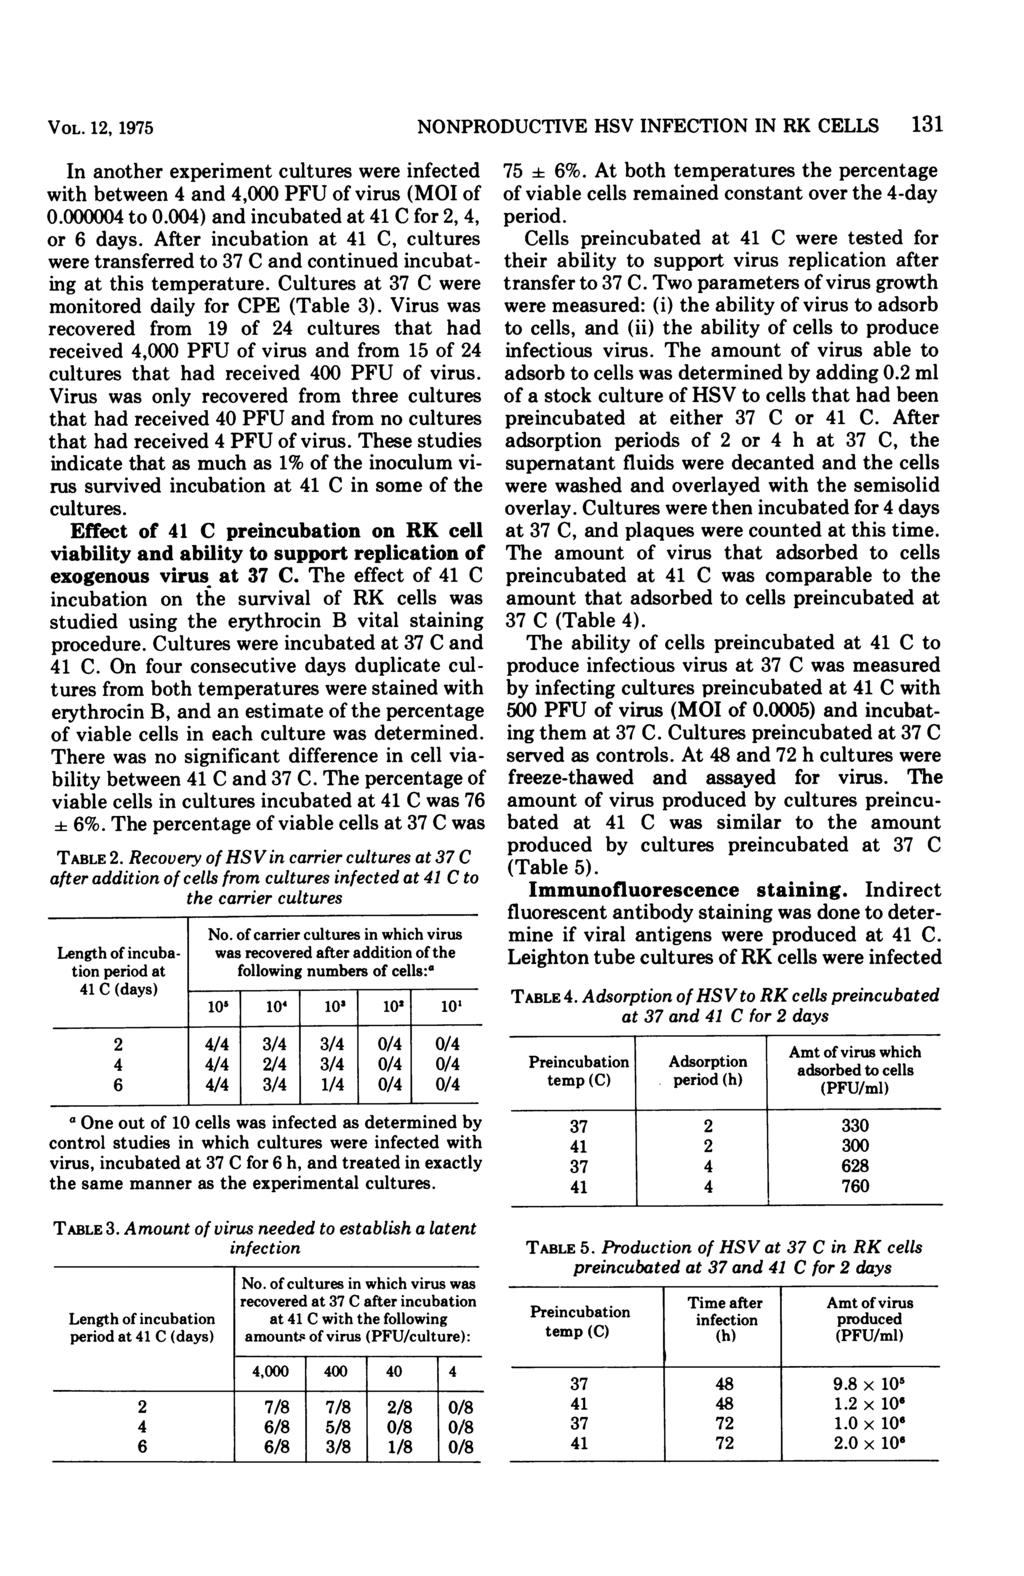 VOL. 12, 1975 In another experiment cultures were infected with between 4 and 4,000 PFU of virus (MOI of 0.000004 to 0.004) and incubated at 41 C for 2, 4, or 6 days.